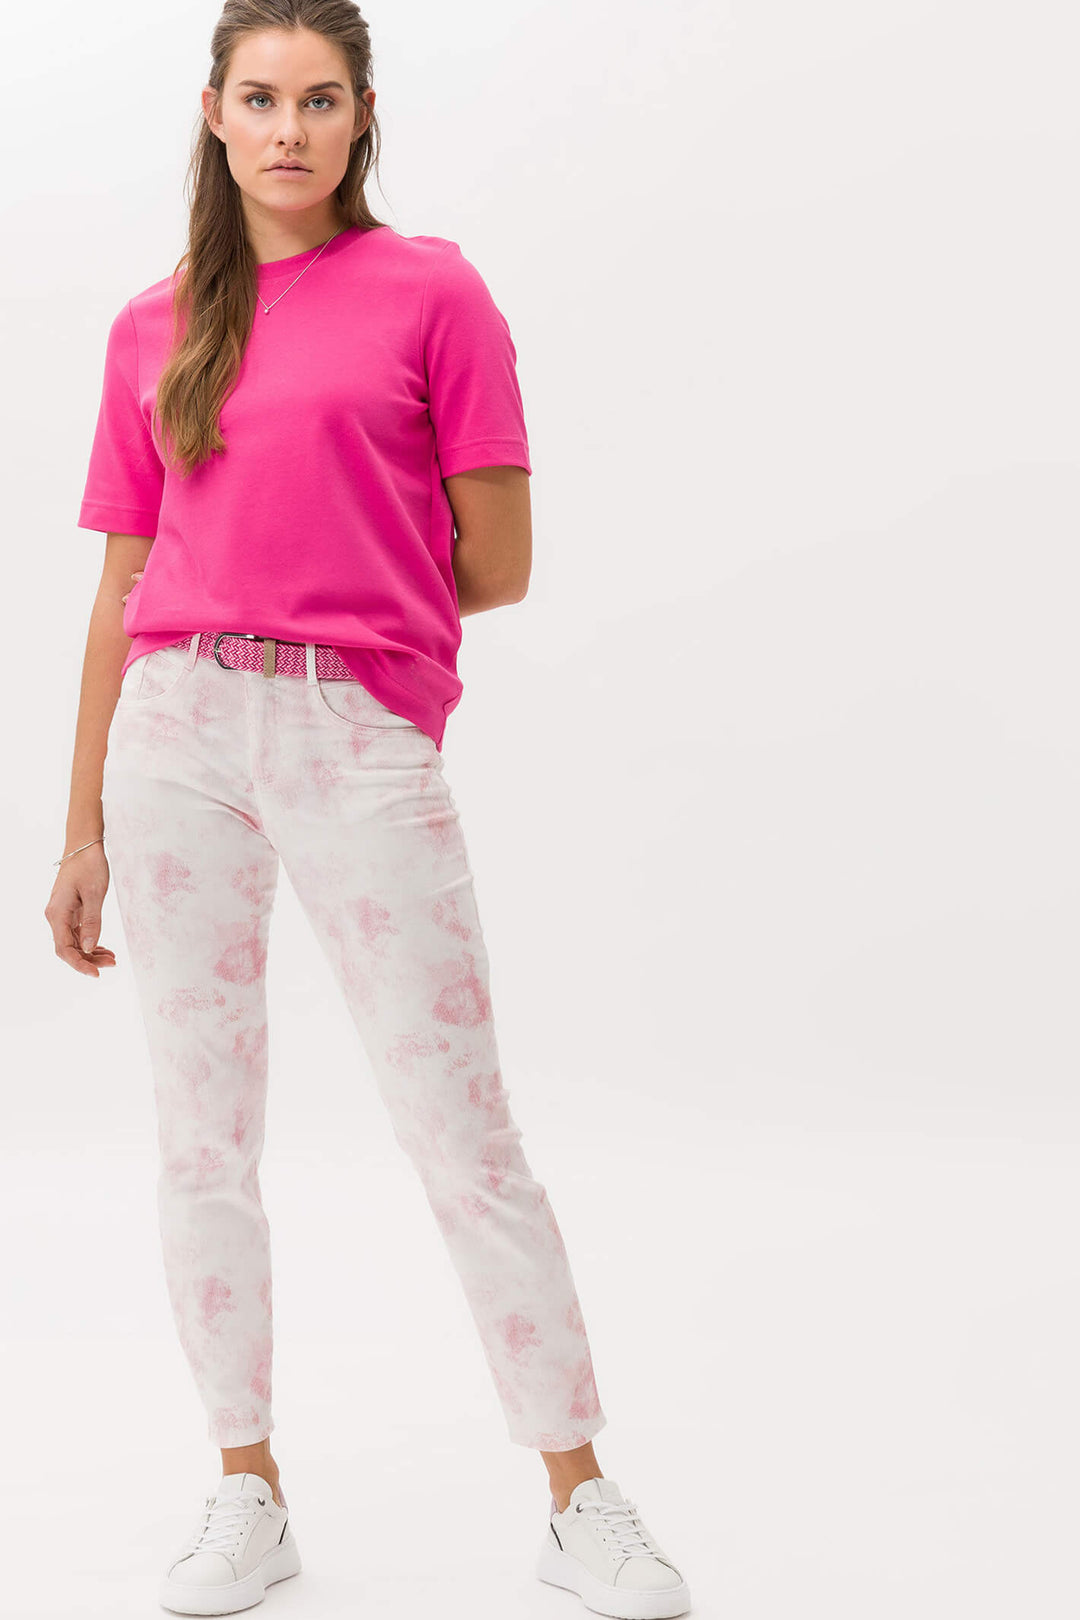 Brax 72-6078 87 Shakira S French Rose Patterned Skinny Fit Jeans - Shirley Allum Boutique